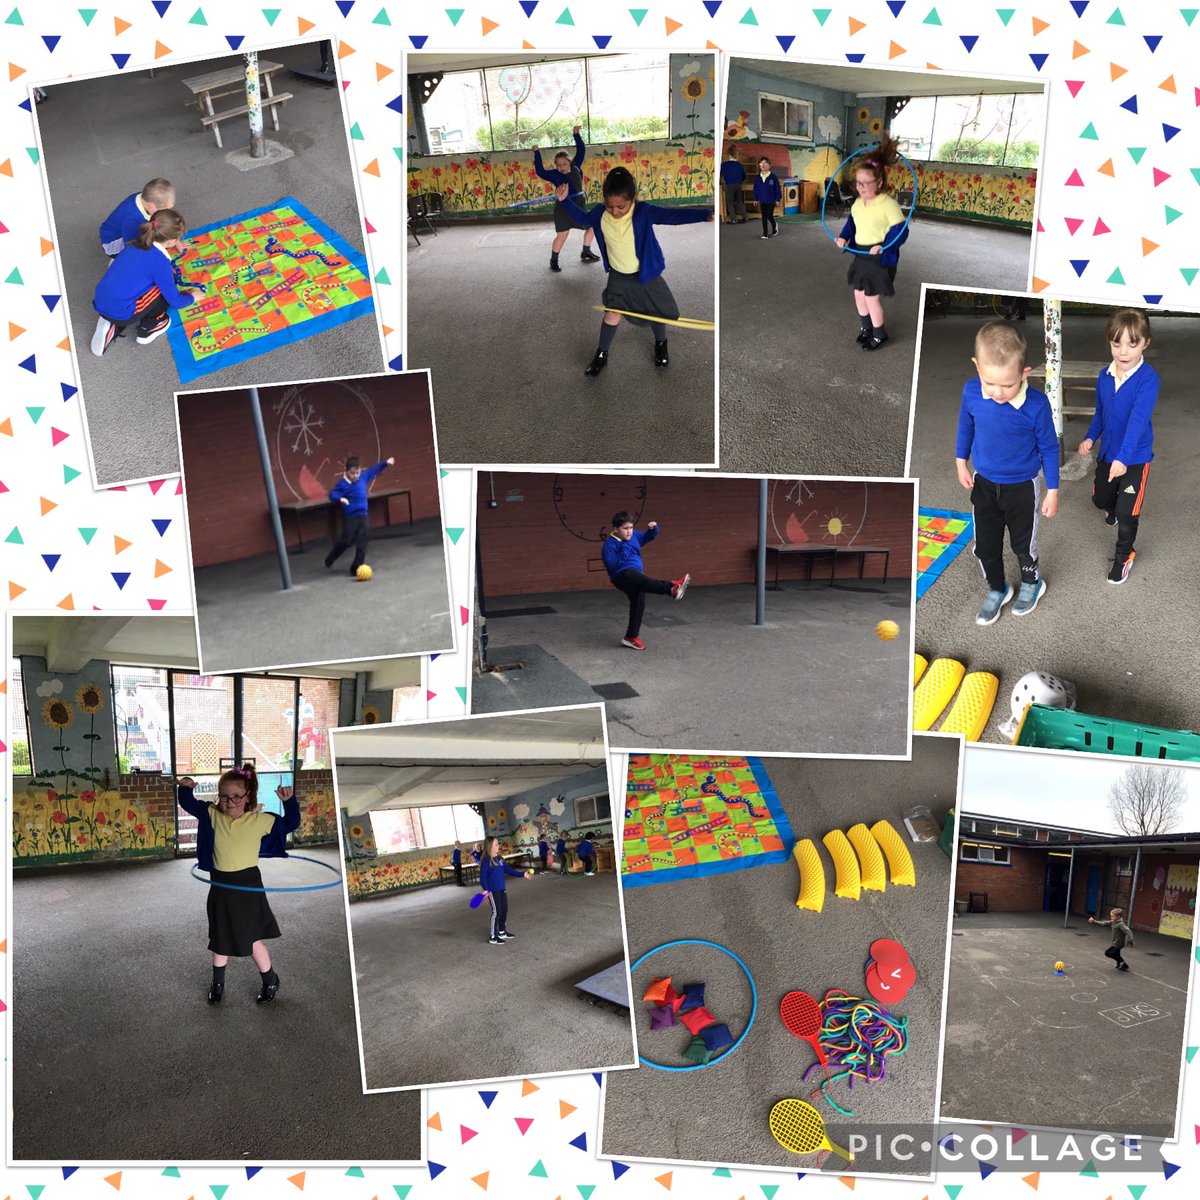 The Big Pedal ✅ The Daily Mile ✅ Lunch and break times ✅ I’m amazed we have time to sit and learn at @rhosyfedwen 😂 being active is such a big part of our school! 🧠💪🏼 @_thedailymile @AJ_SEWales #ProudToBeRYF #BeTheBestYou #TeamRYF #HealthyHarri #AmbitiousAlys